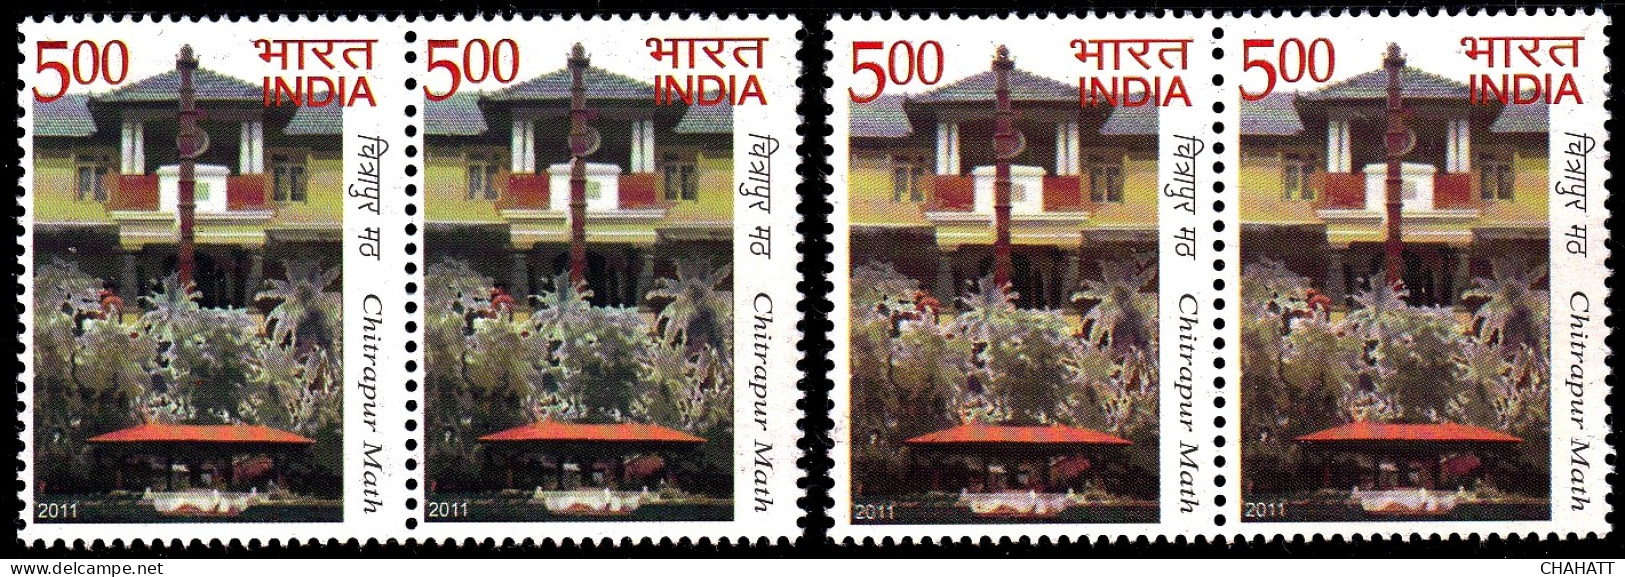 INDIA-2011-HINDUISM- CHITRAPUR MATH- COLOR VARIETY-2x PAIRS-MNH-IE-22 - Errors, Freaks & Oddities (EFO)